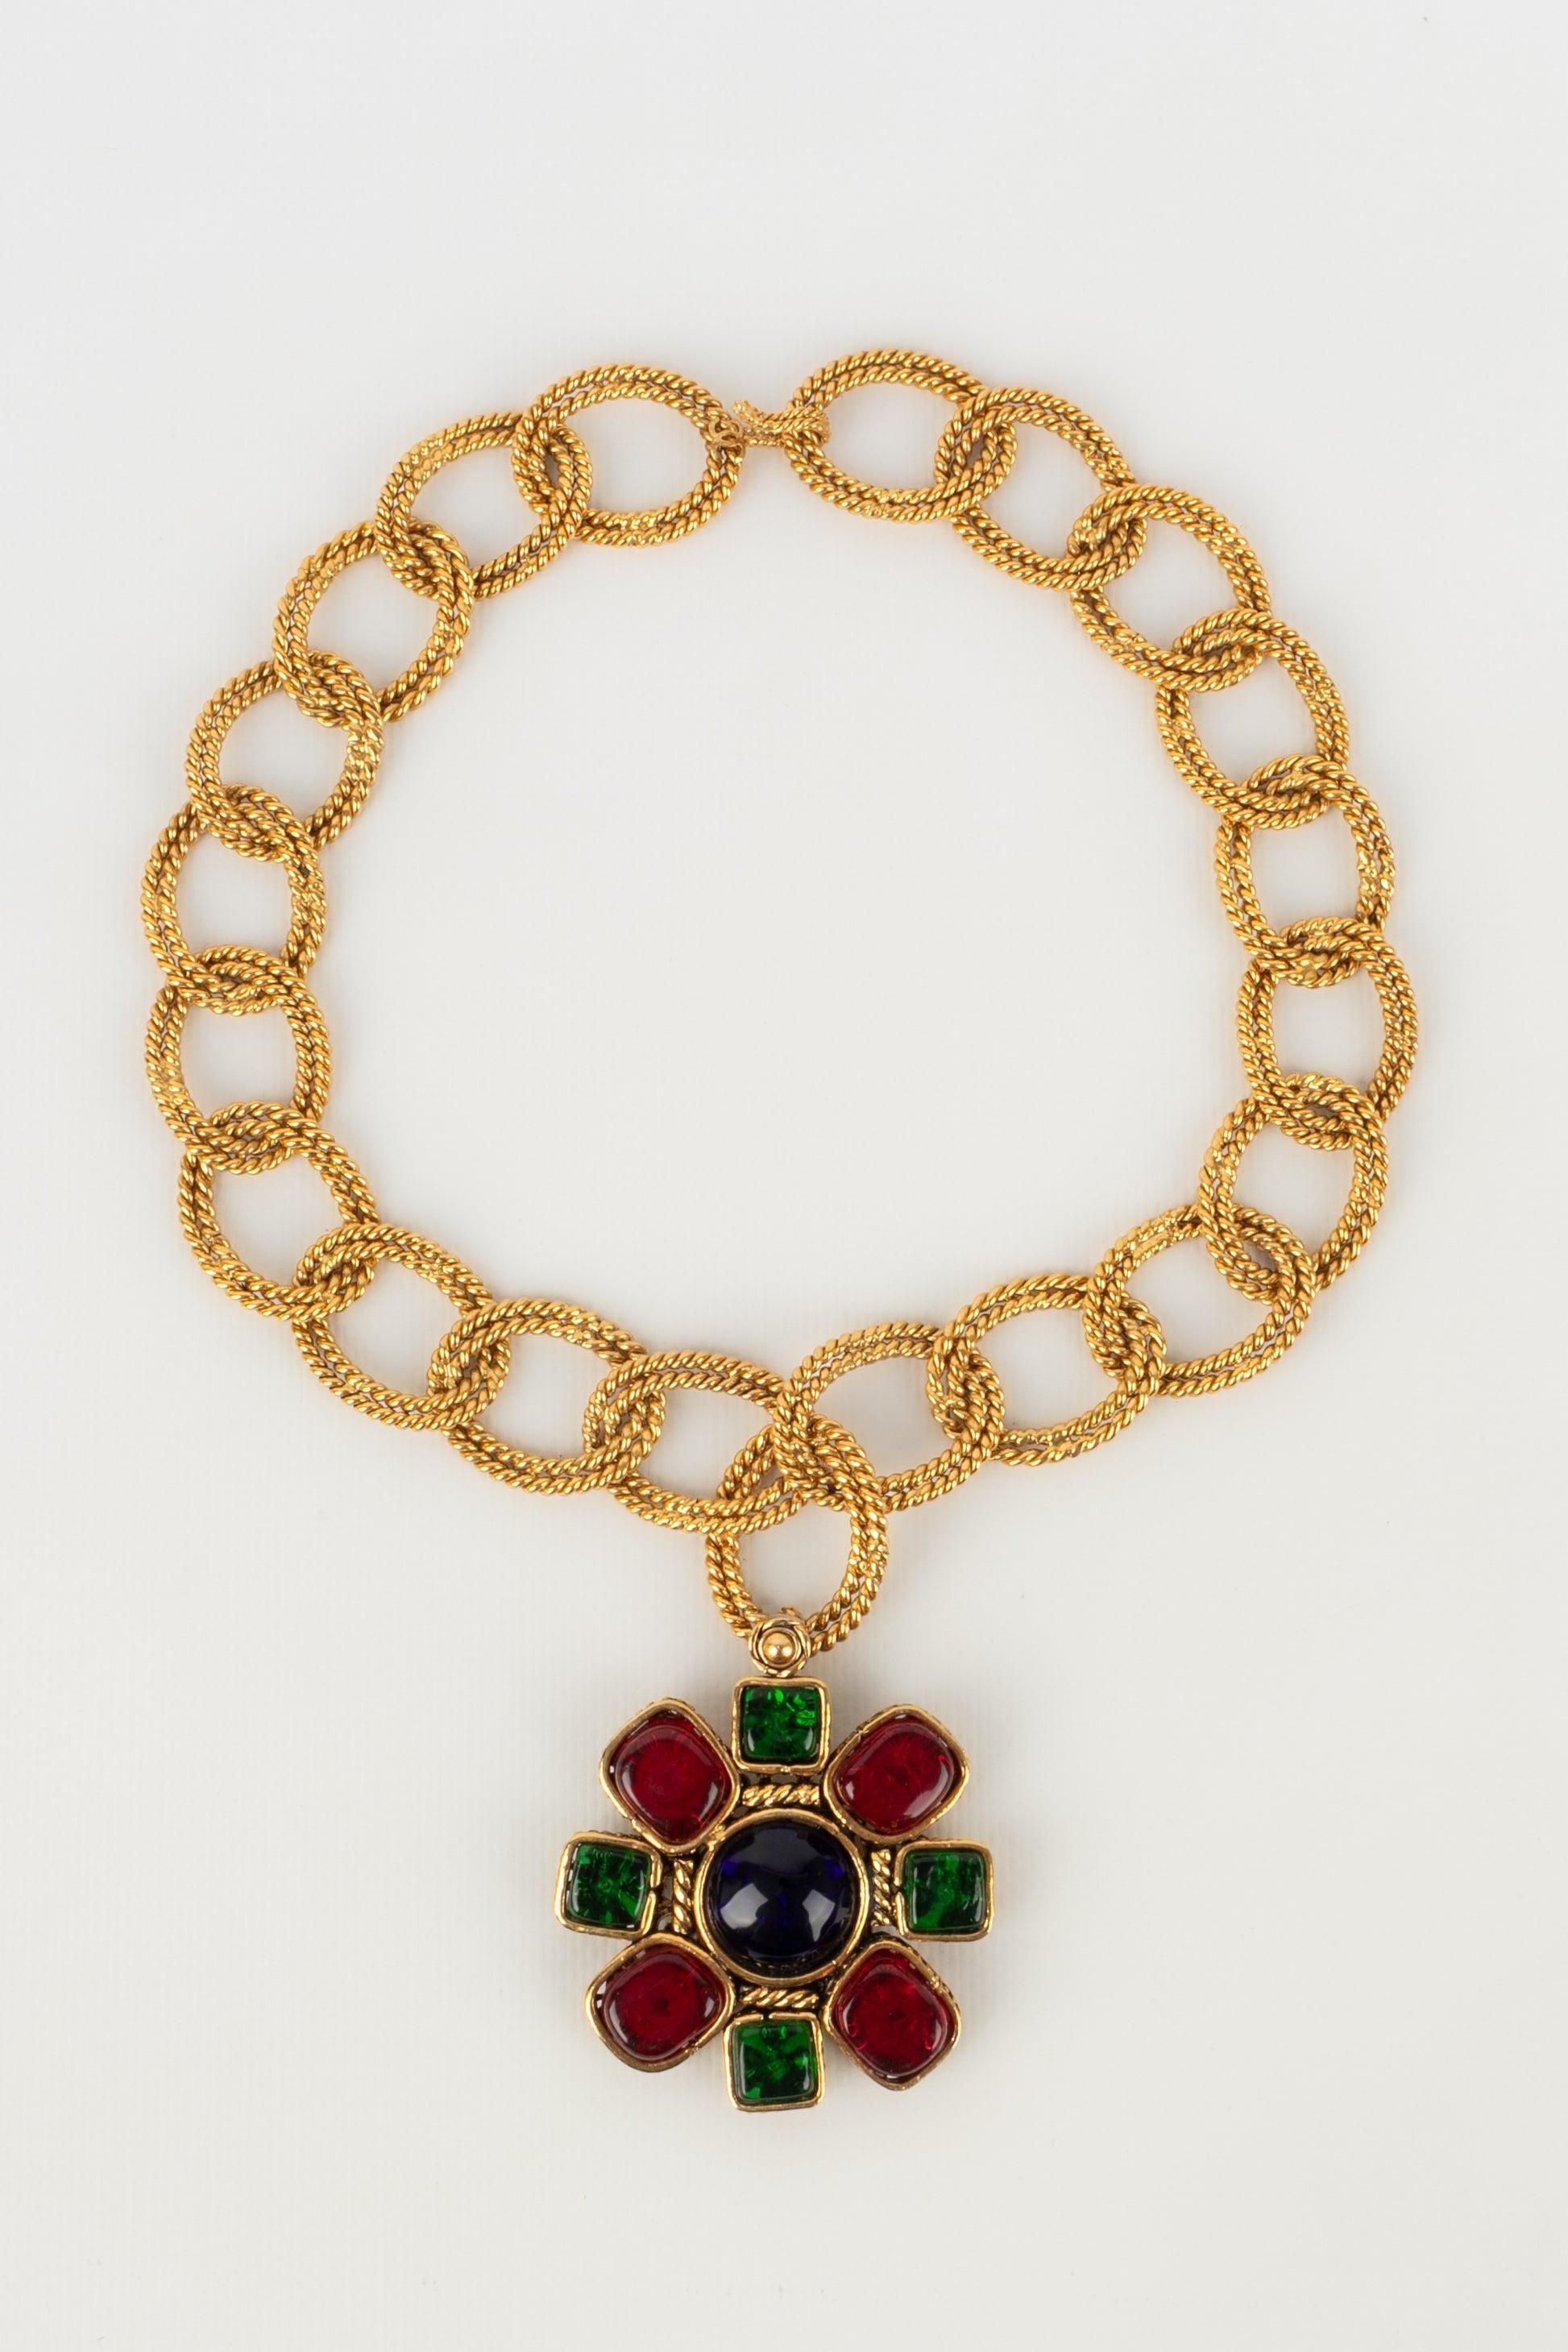 Chanel - (Made in France) Gold metal necklace and glass paste pendant. Collection 2cc3.

Additional information:
Condition: Very good condition
Dimensions: Length: 50 cm - Pendant: 6 cm x 6 cm
Period: 21st Century

Seller Reference: CB39